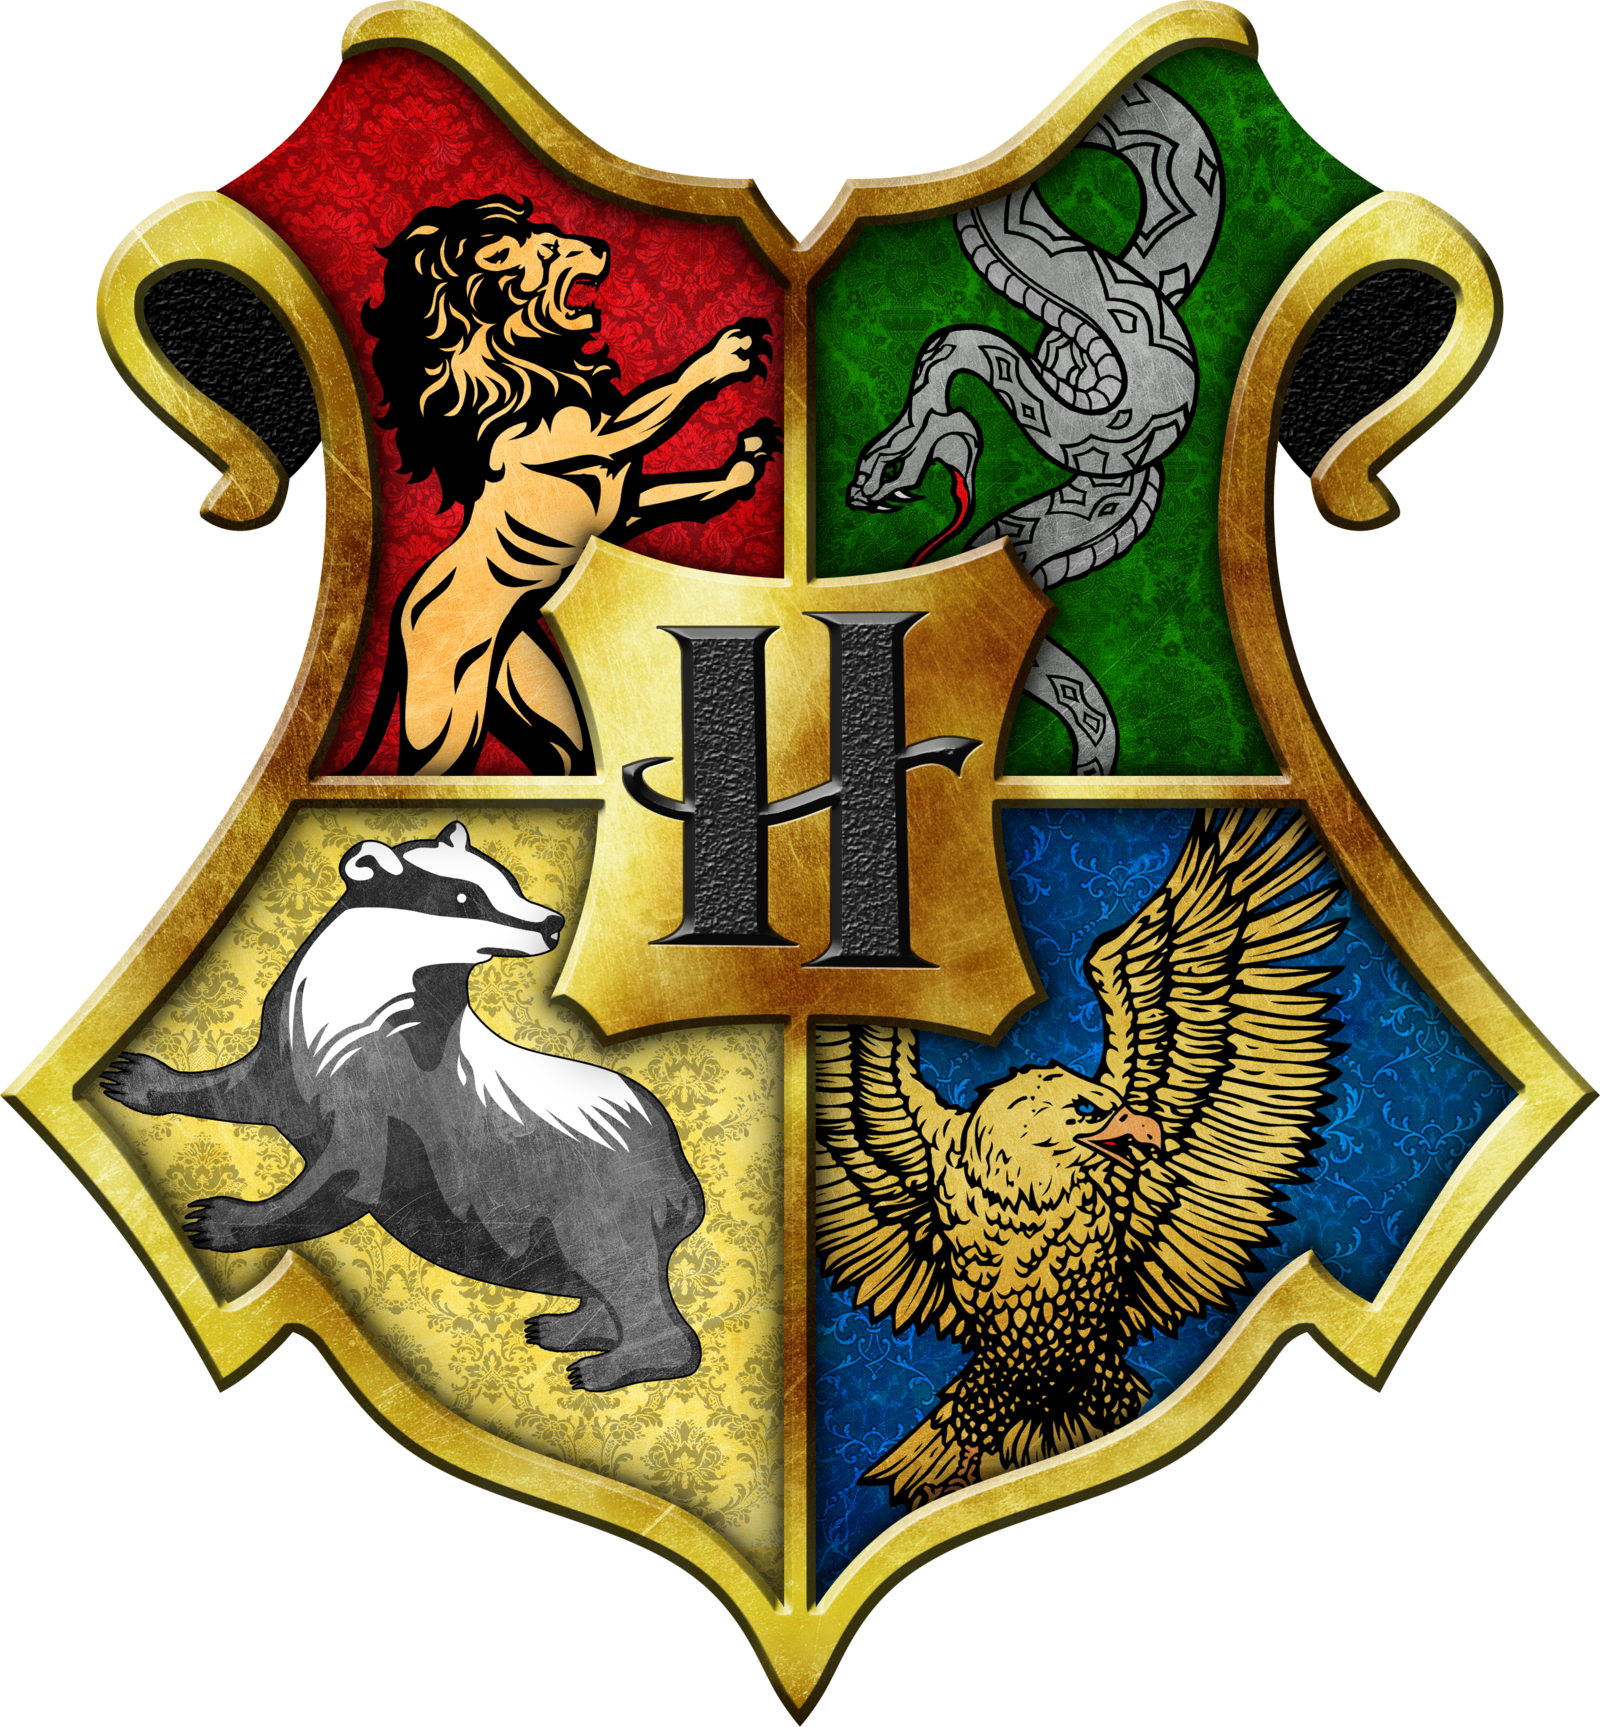 Ravenclaw, the Thinking House  Where the Dog Star rages